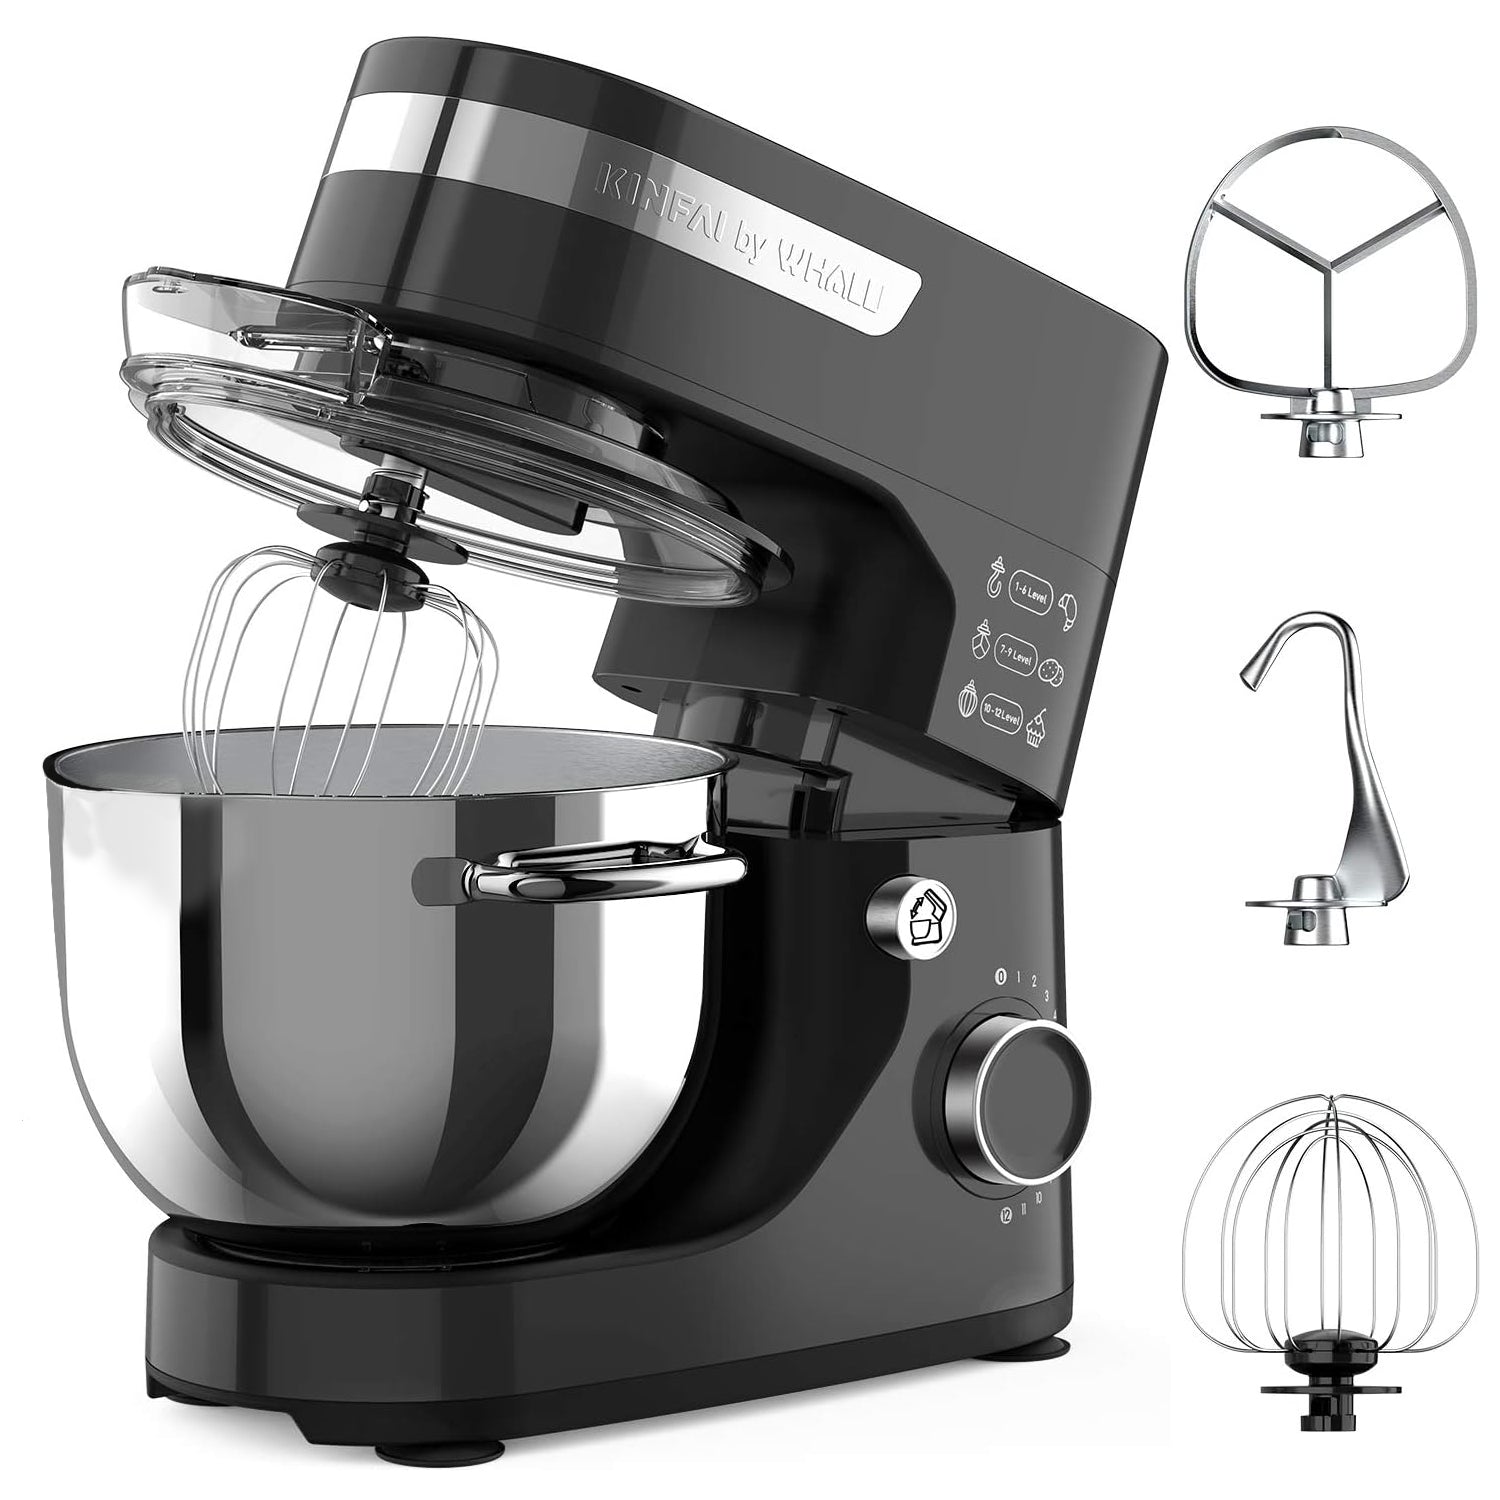 WHALL® Stand Mixer - 5.5Qt 12-Speed Tilt-Head Electric Kitchen Mixer with Dough Hook/Wire Whip/Beater, Stainless Steel Bowl (black)